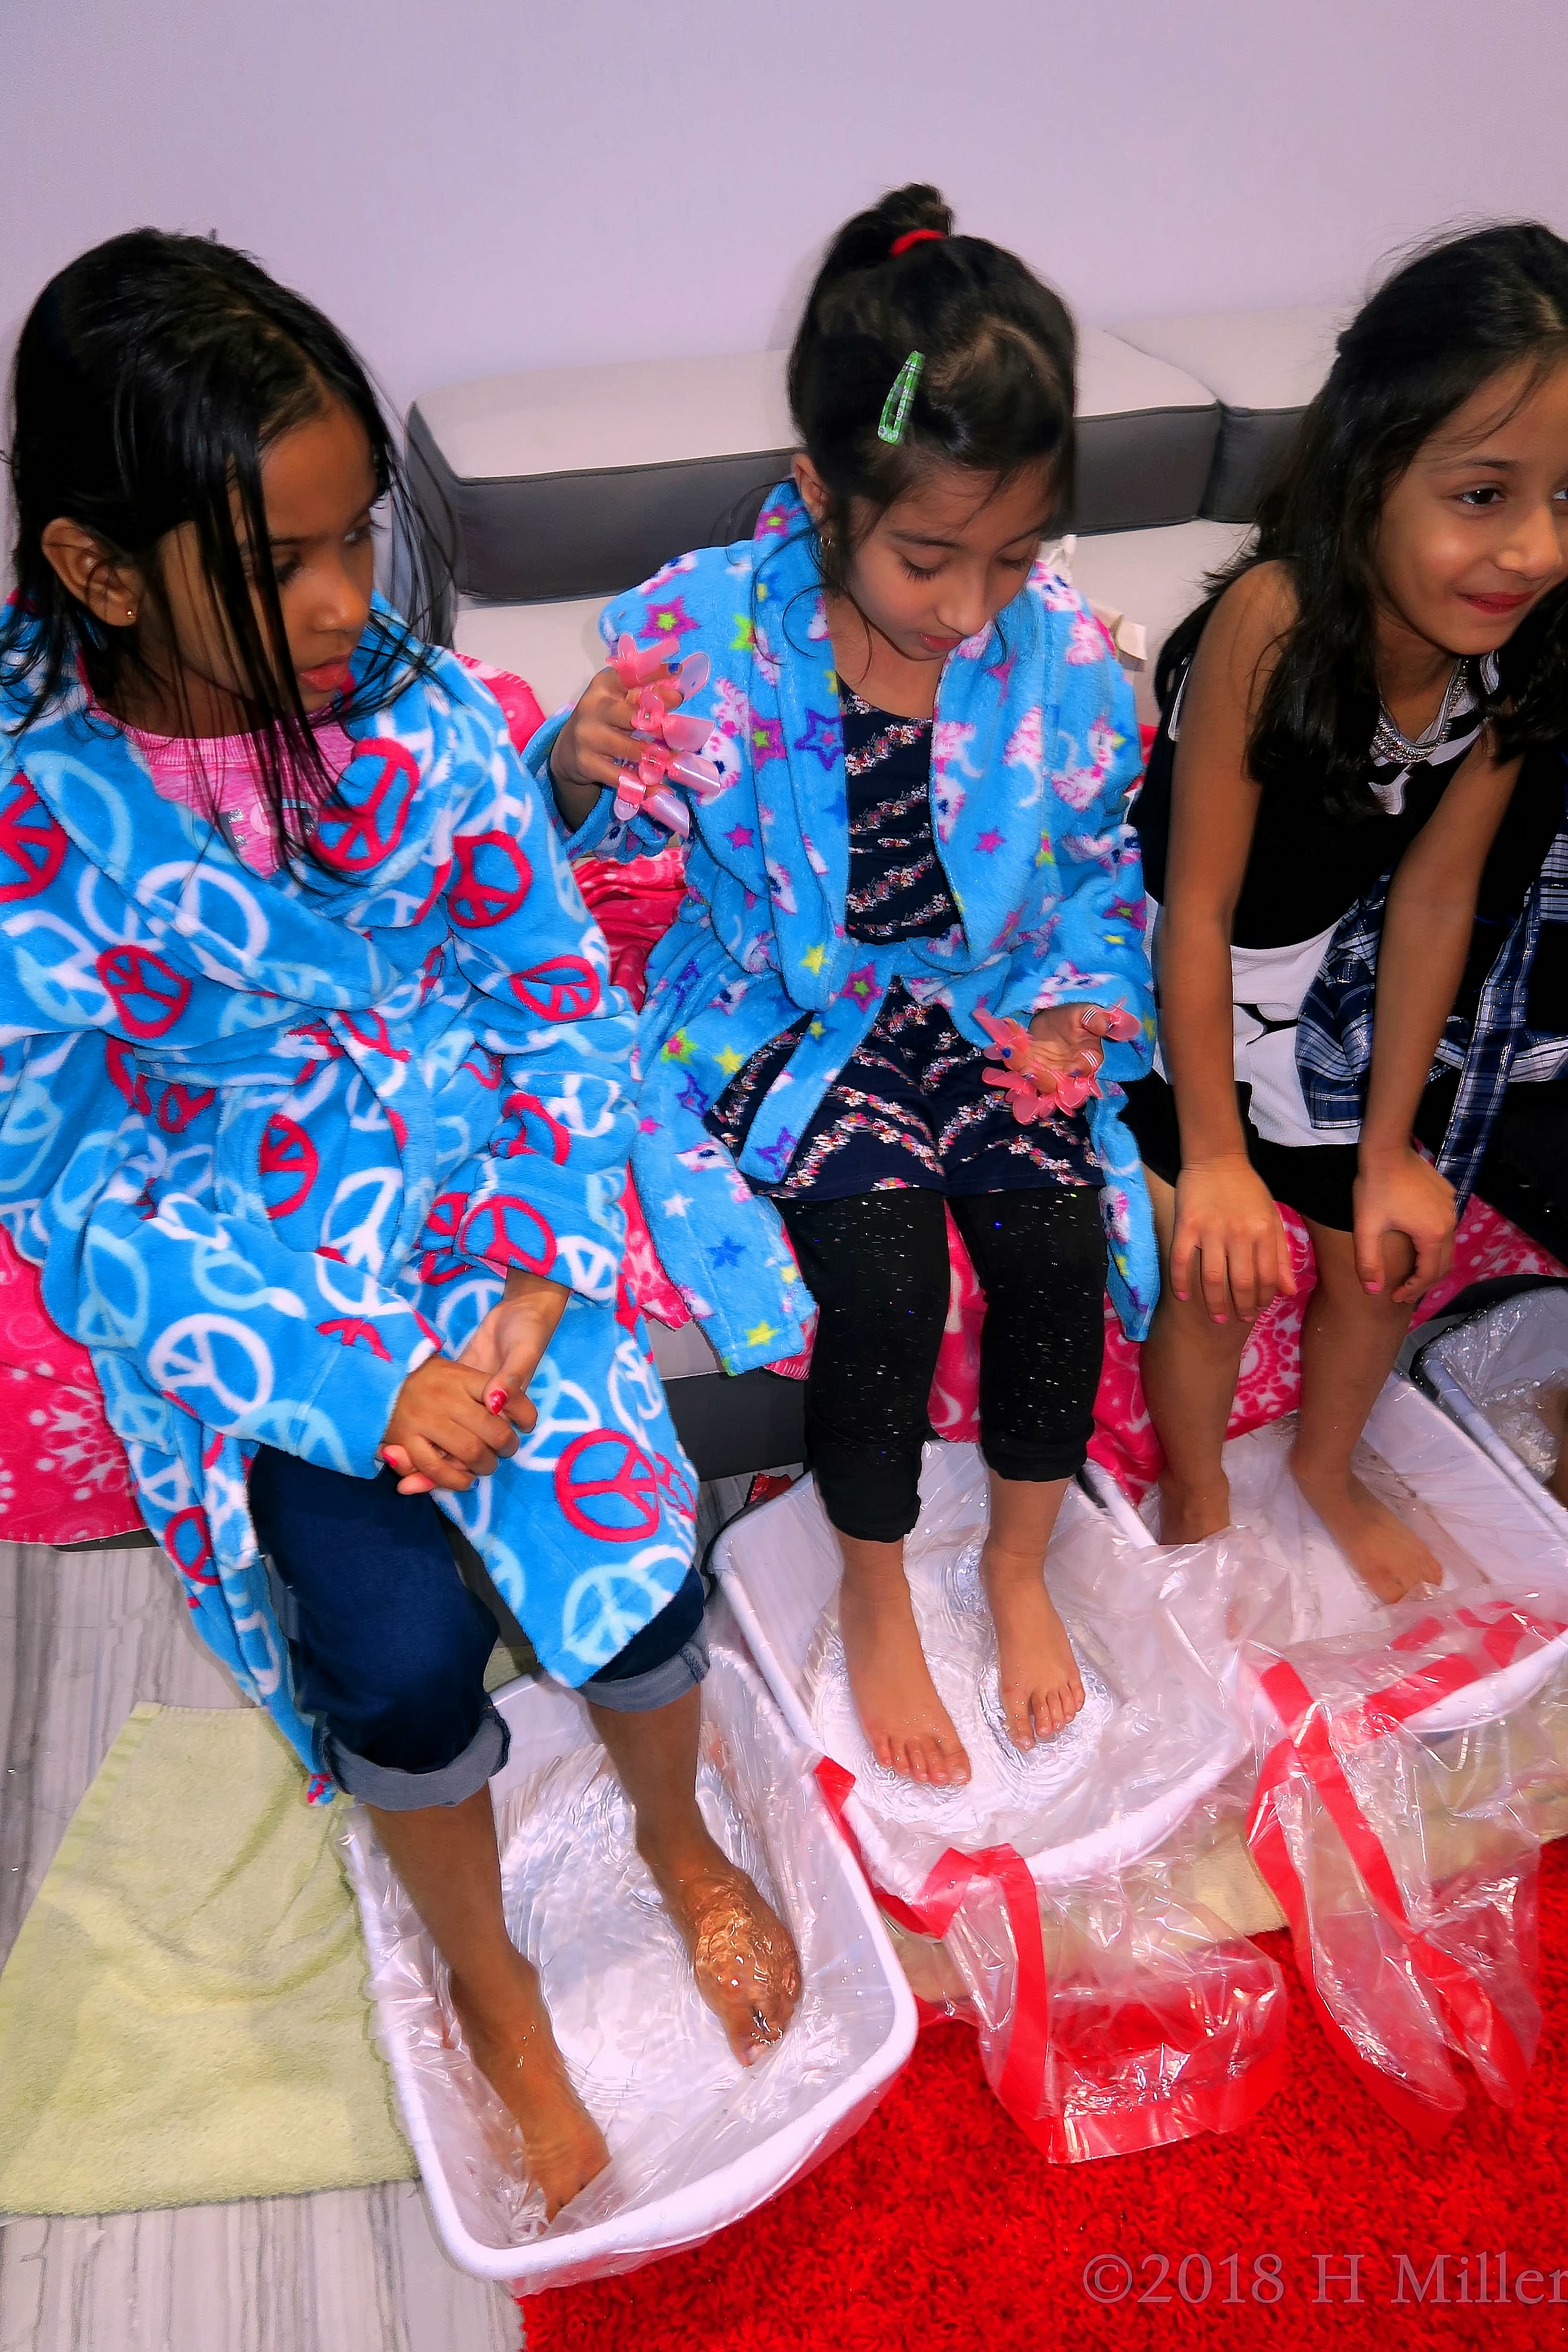 Relaxed and Comfy In Blue Printed Spa Robes During Pedicures For Girls. 